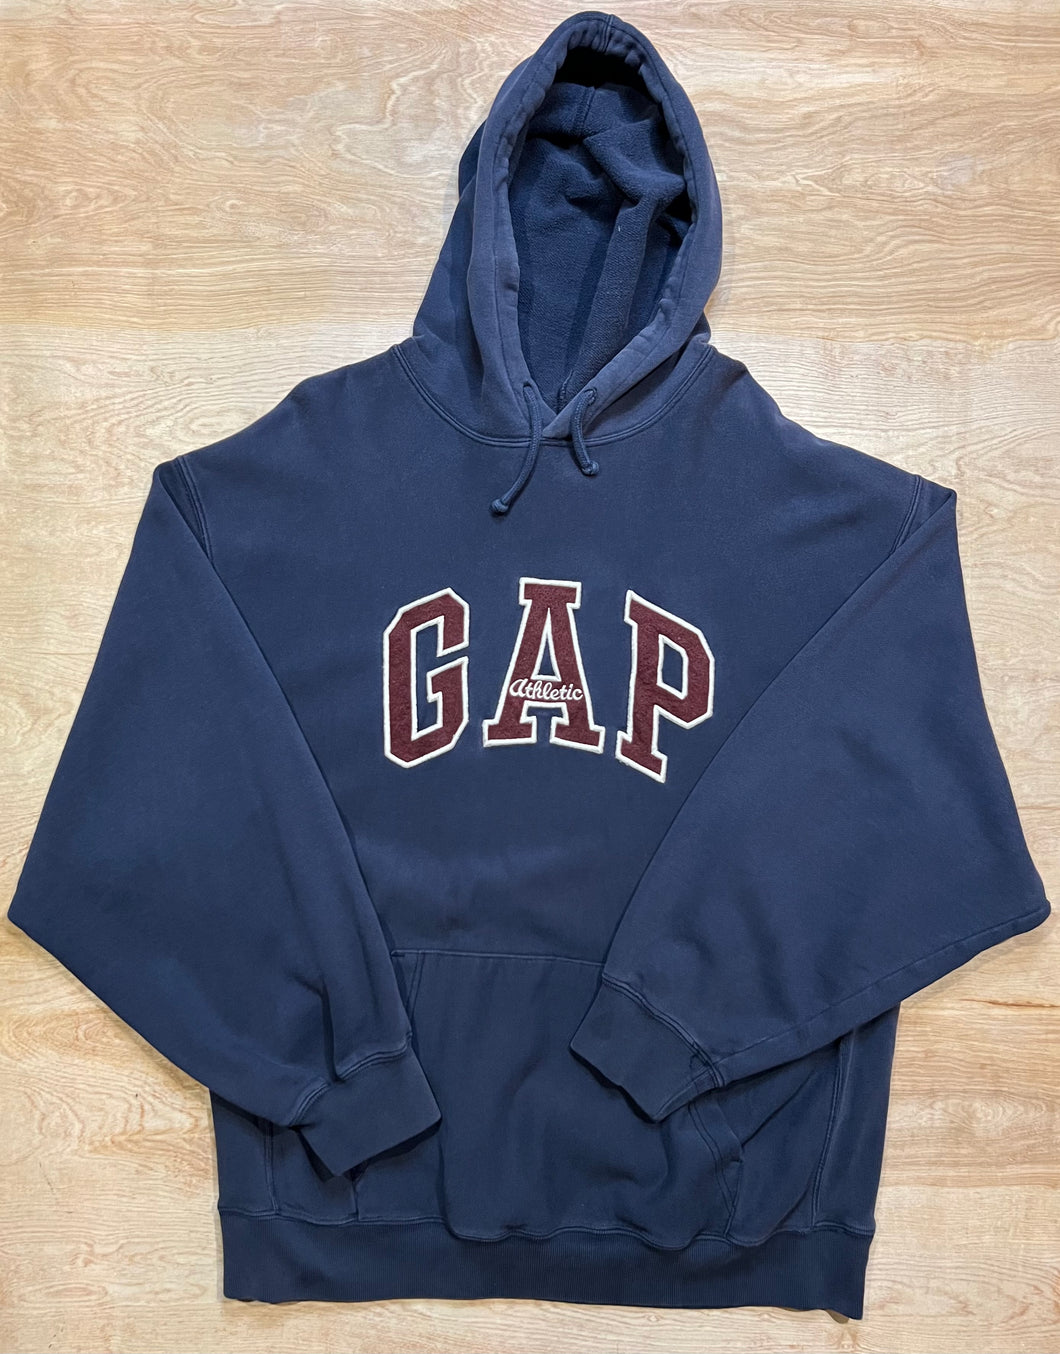 Classic Gap Embroidered Hoodie